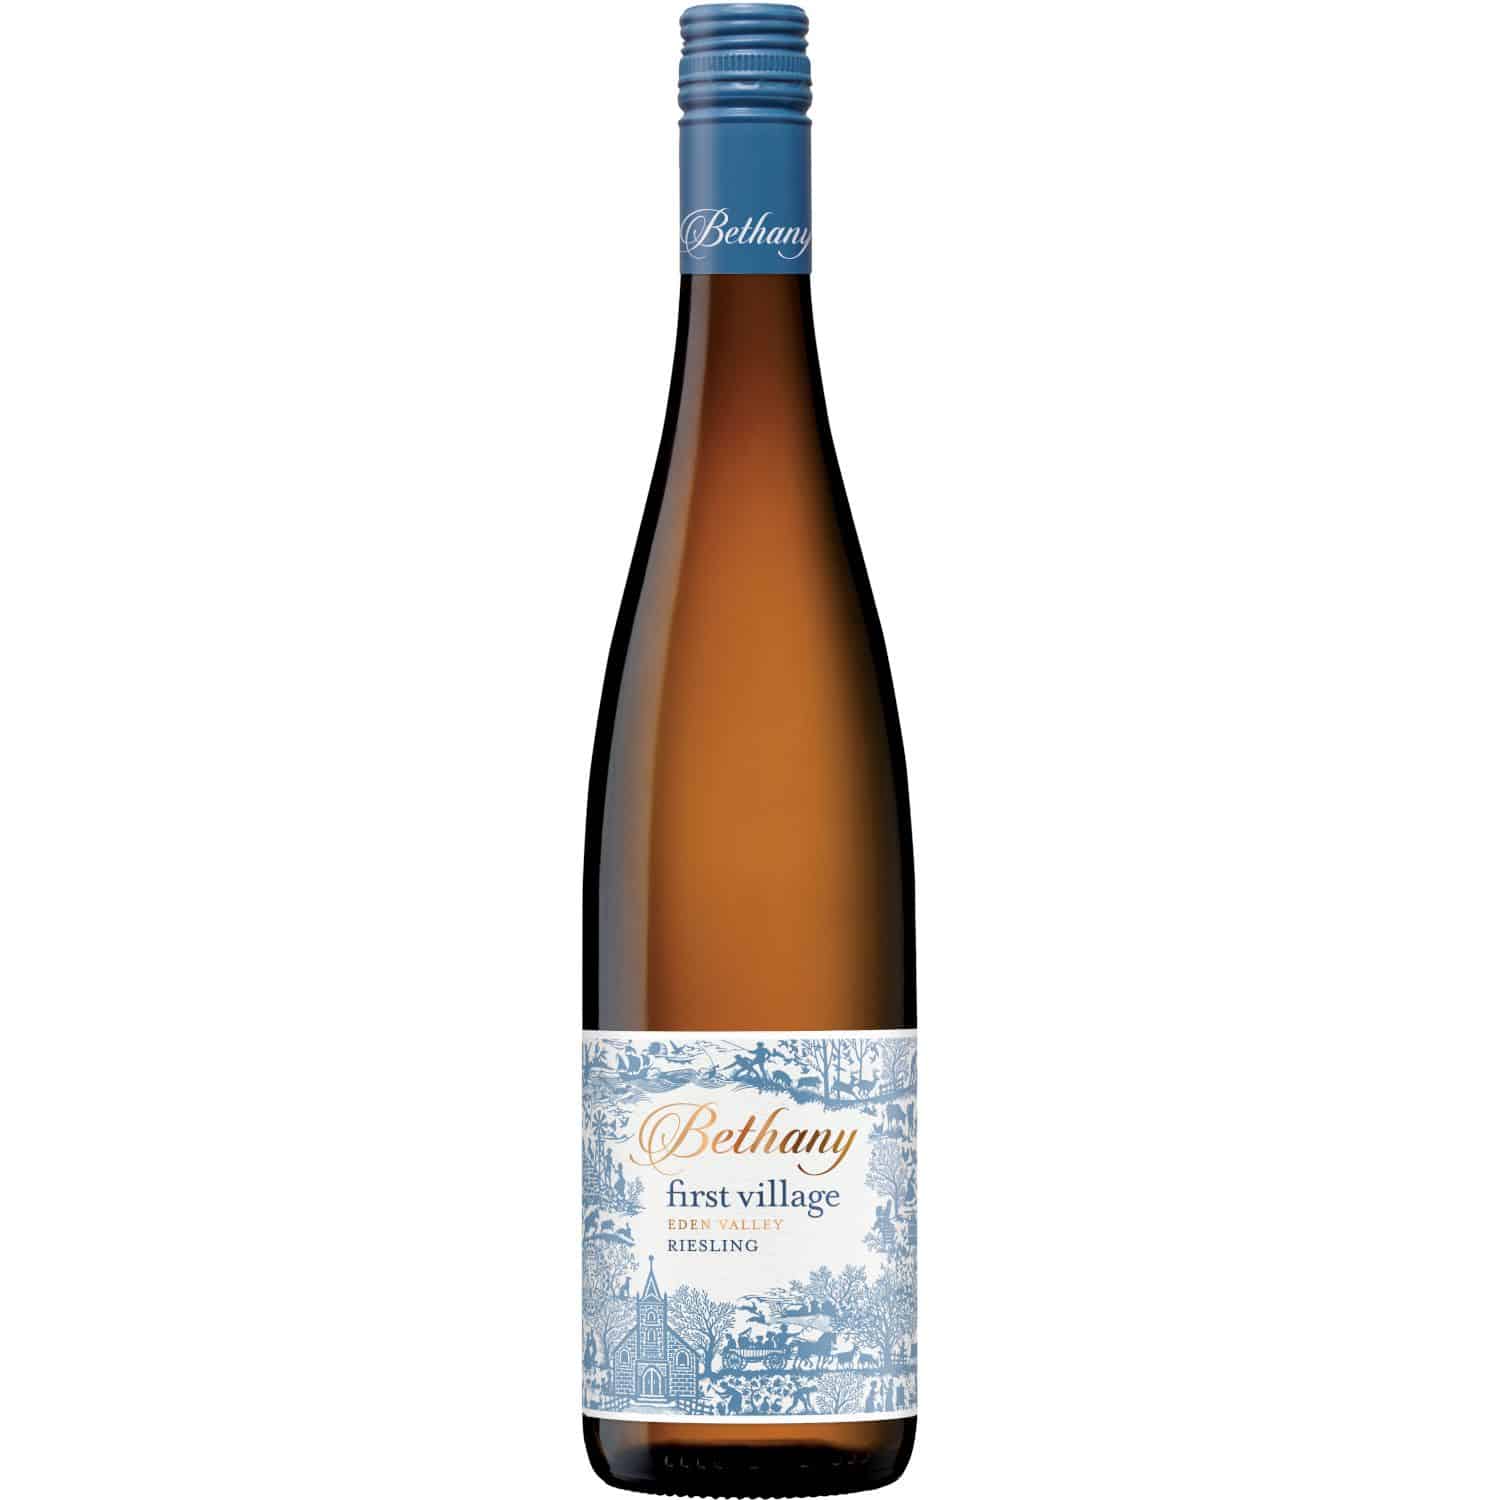 Bethany First Village Eden Valley Riesling